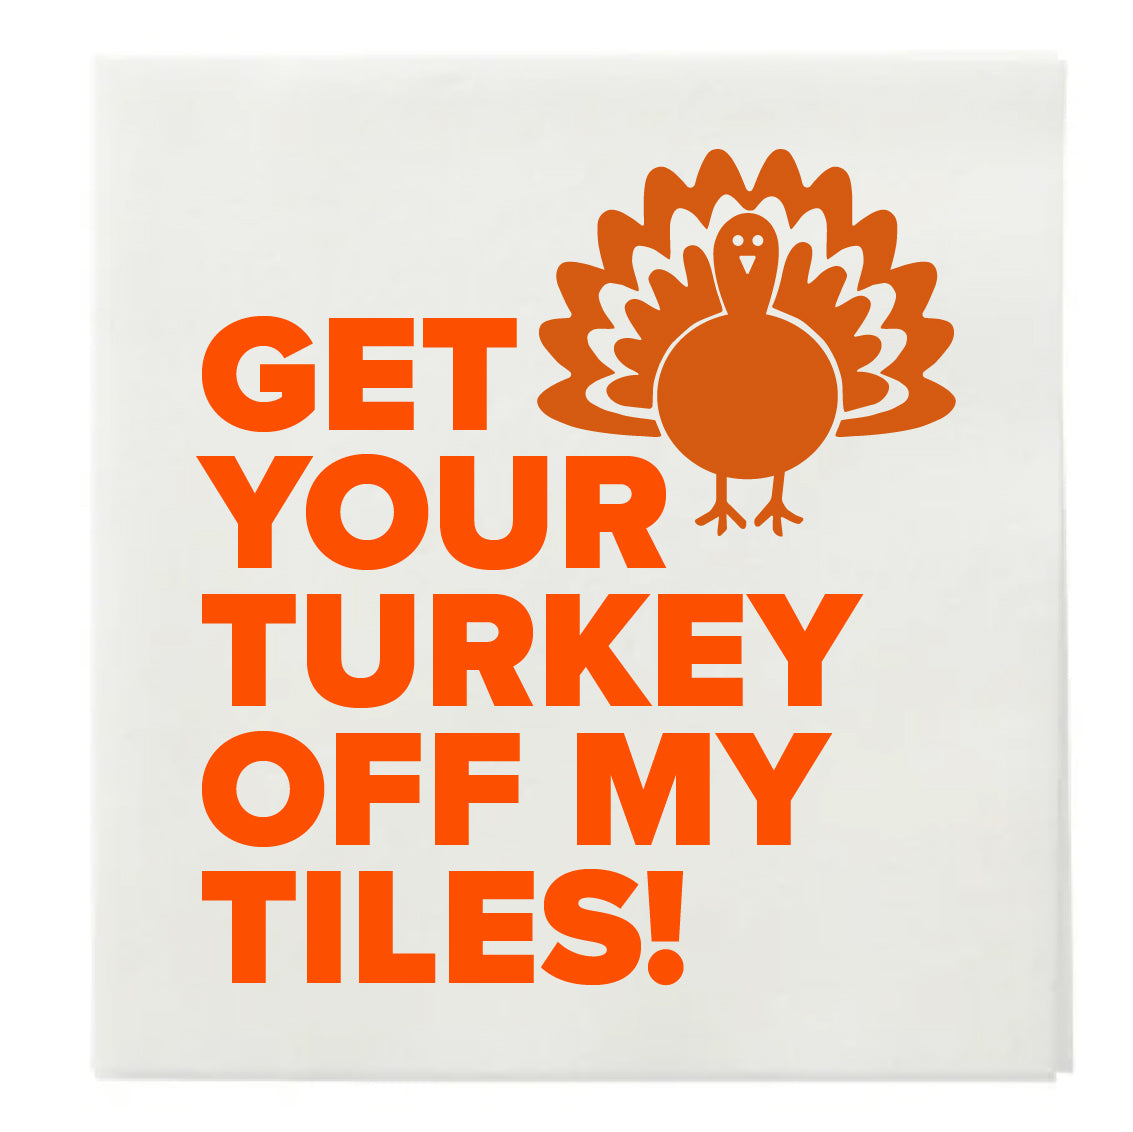 "GET YOUR TURKEY OFF MY TILES" MAHJONG COCKTAIL NAPKINS